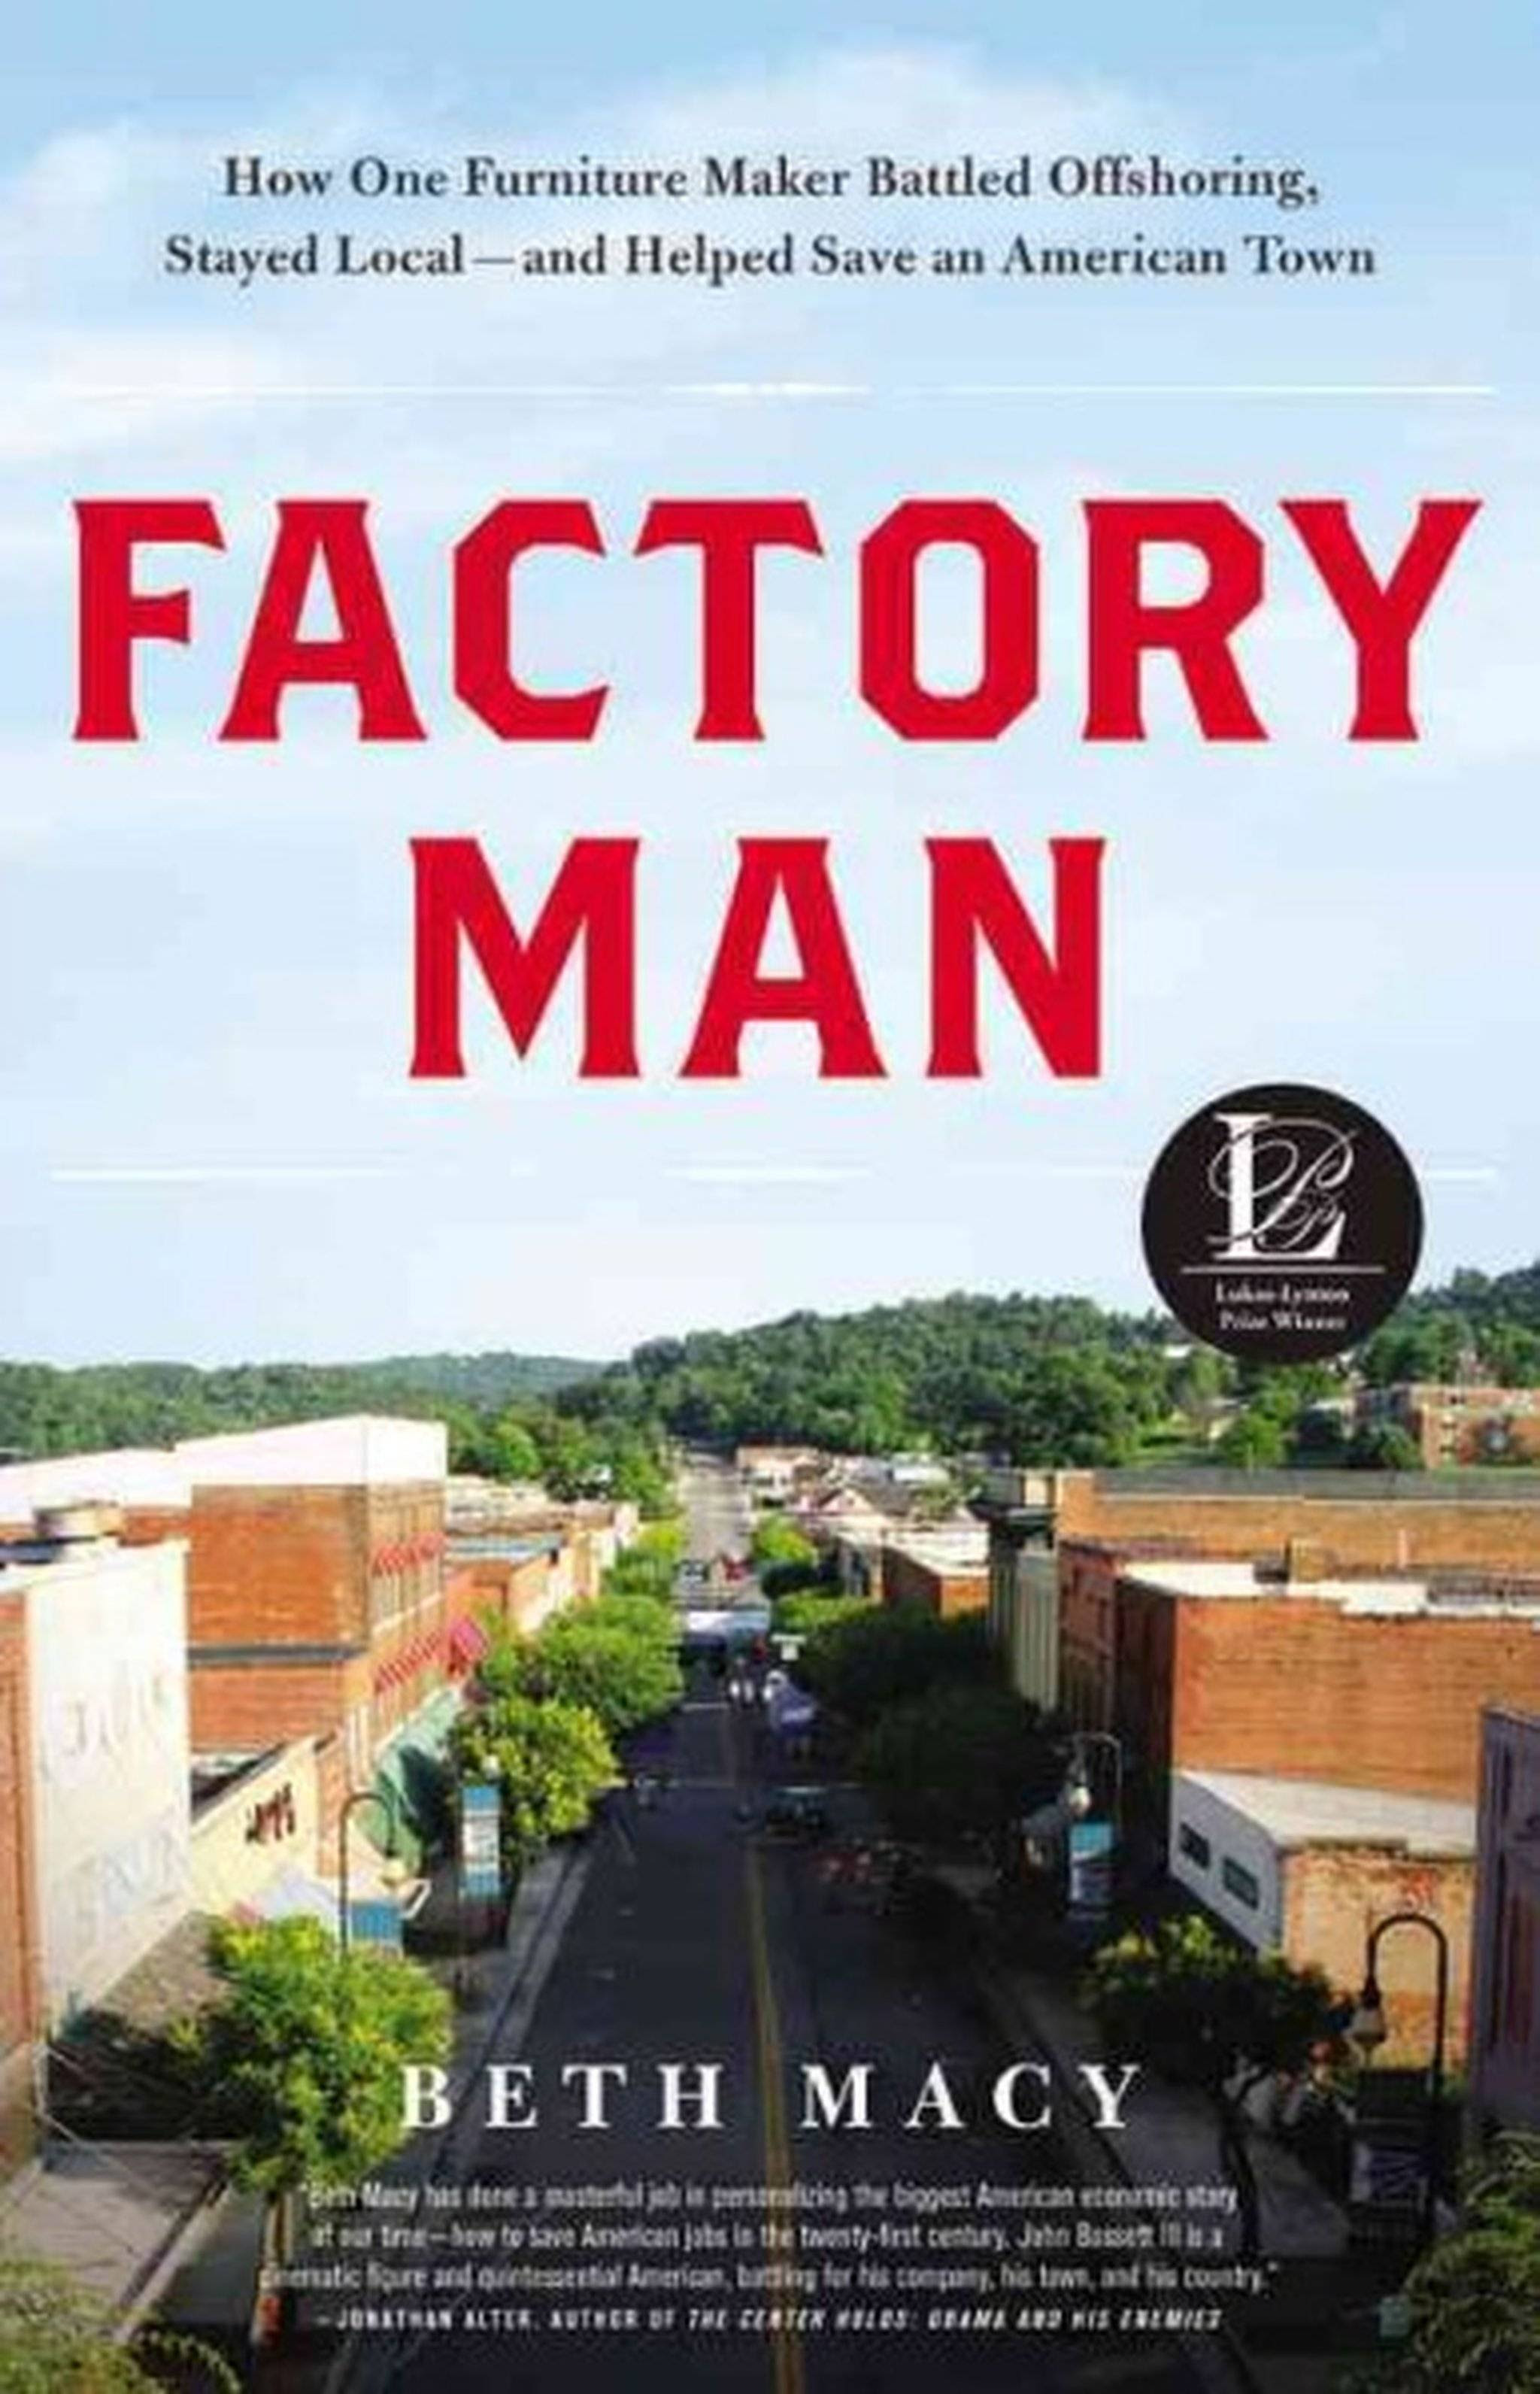 Factory Man How One Furniture Maker Battled Offshoring Stayed Local and
Helped Save an American Town Epub-Ebook